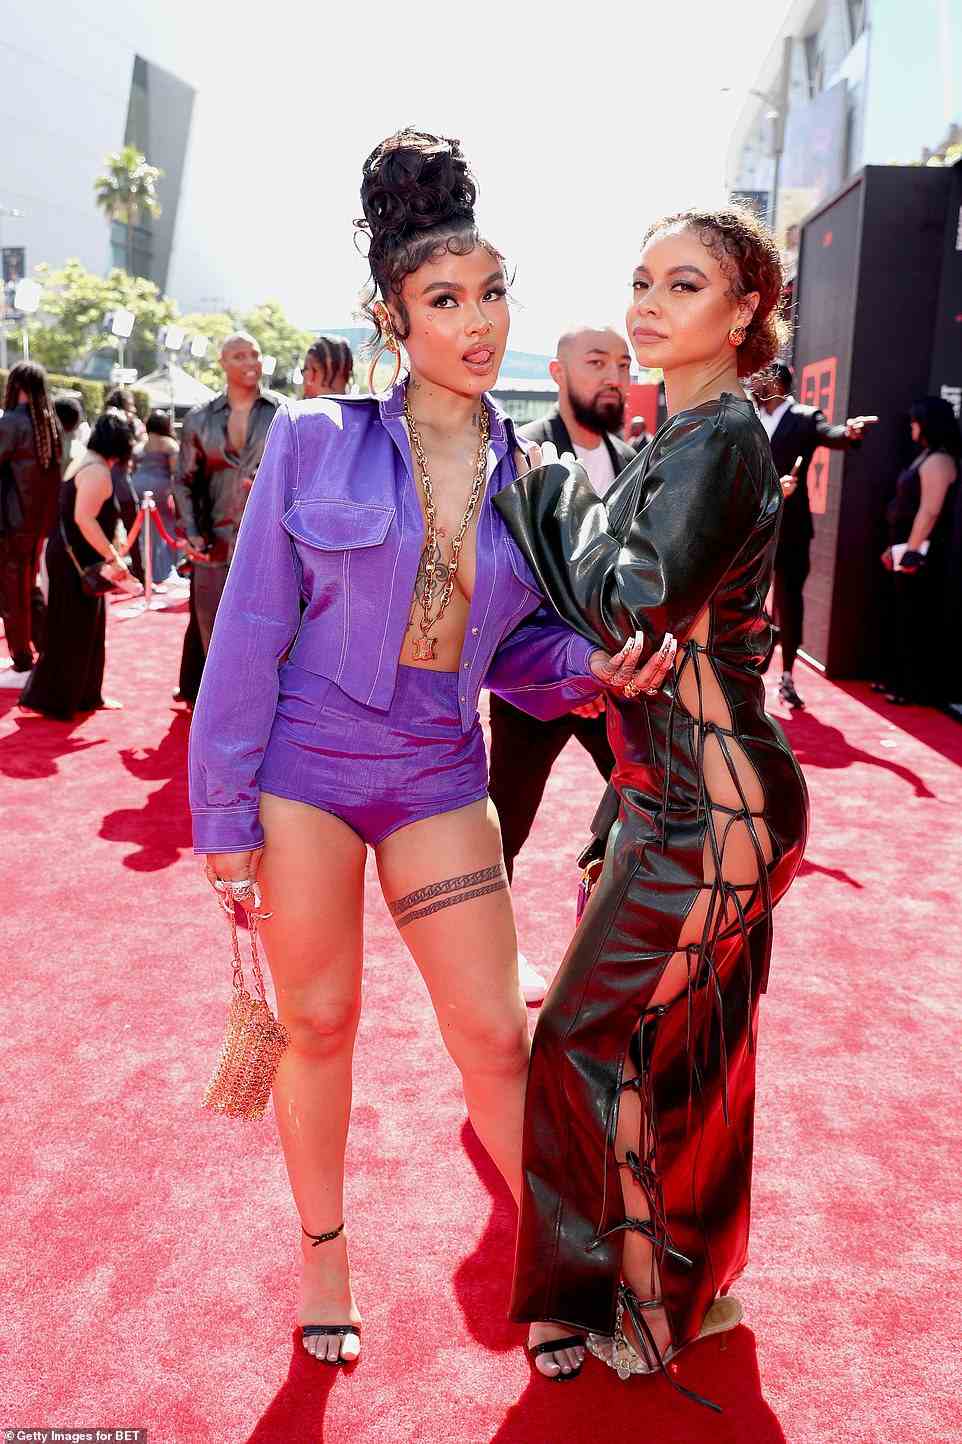 Vixens: She posed with Crystal Westbrooks, who sizzled in an alluring side-tie black leather dress